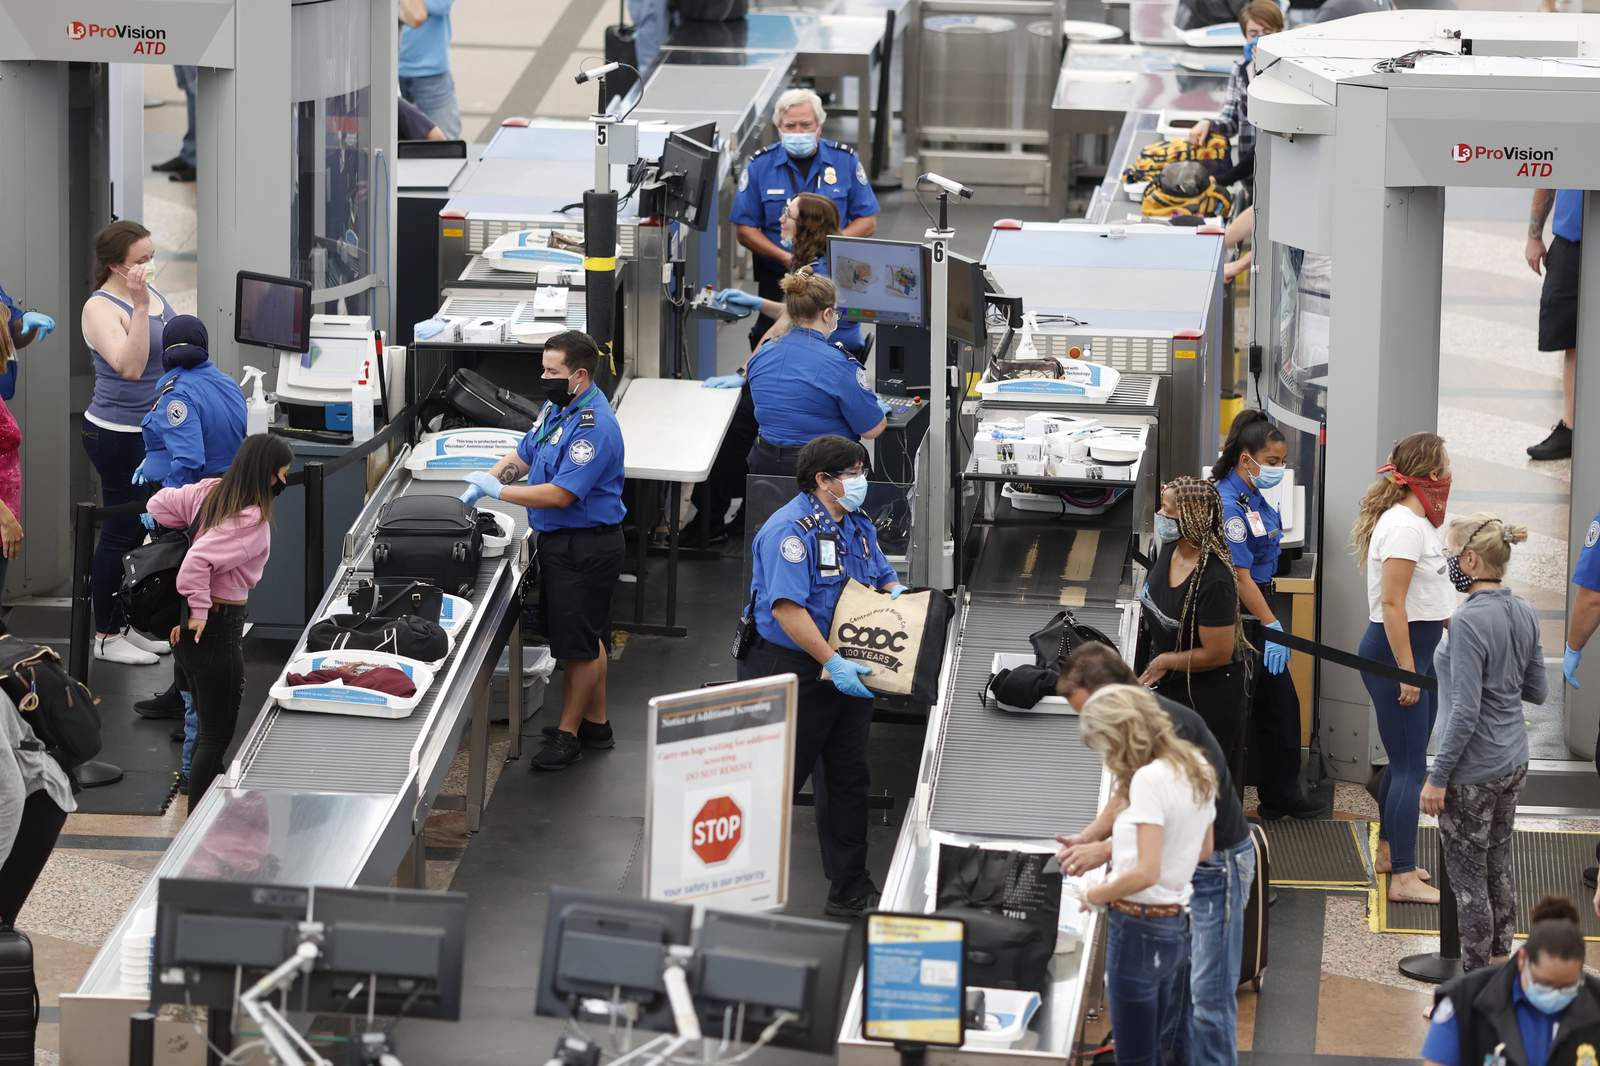 TSA agents find twice as many guns per million passengers at airports in 2020 compared to previous year